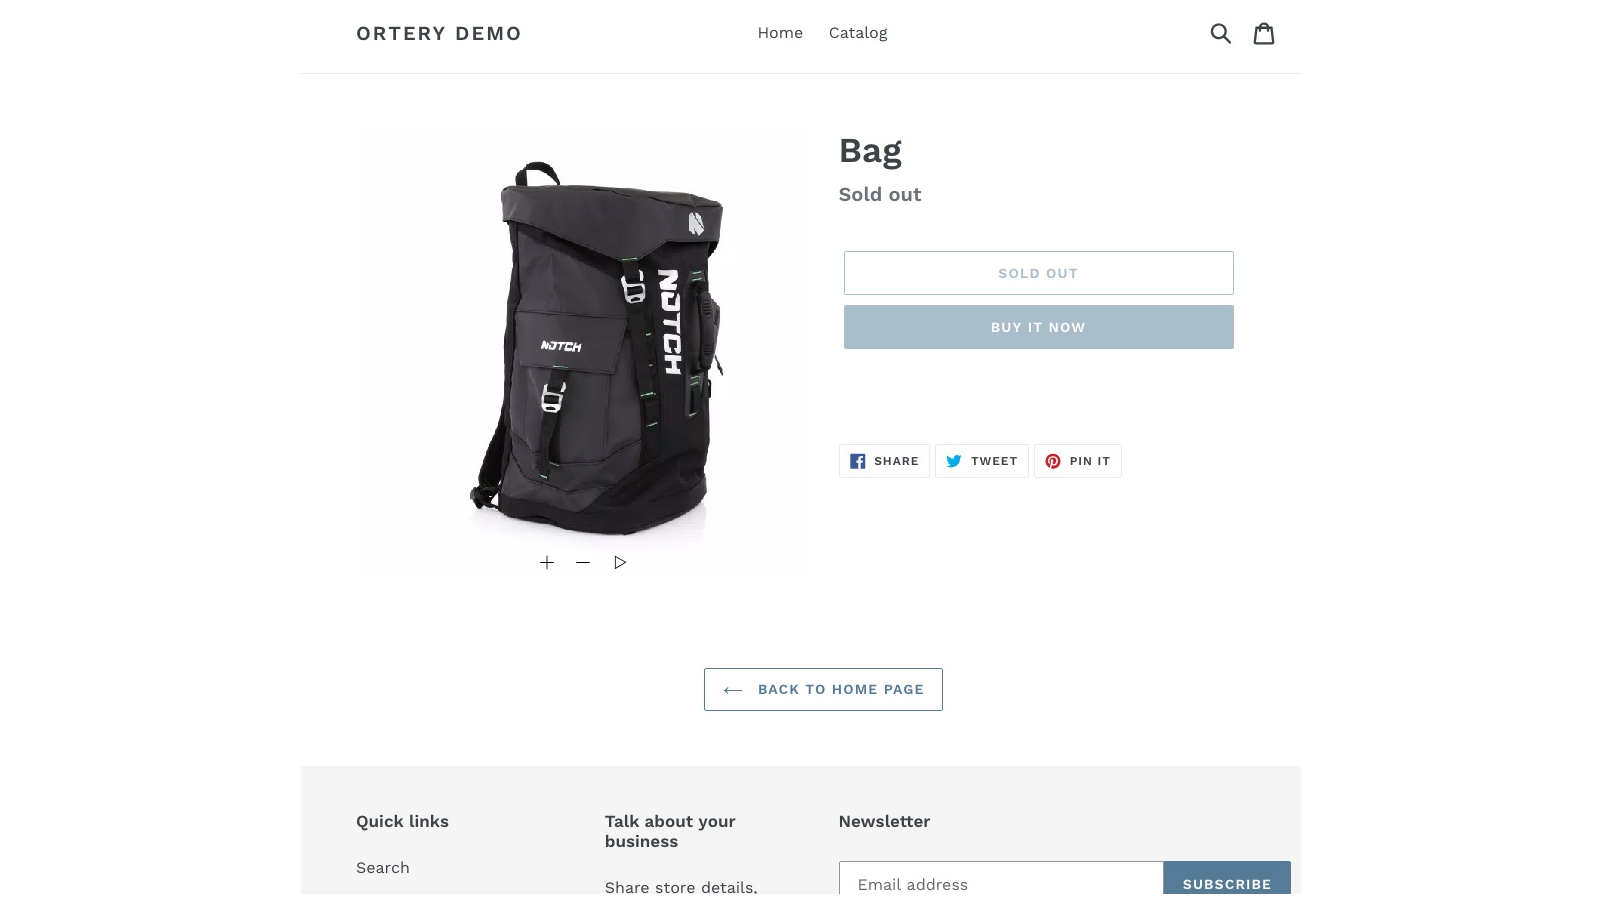 The Result of Product Page